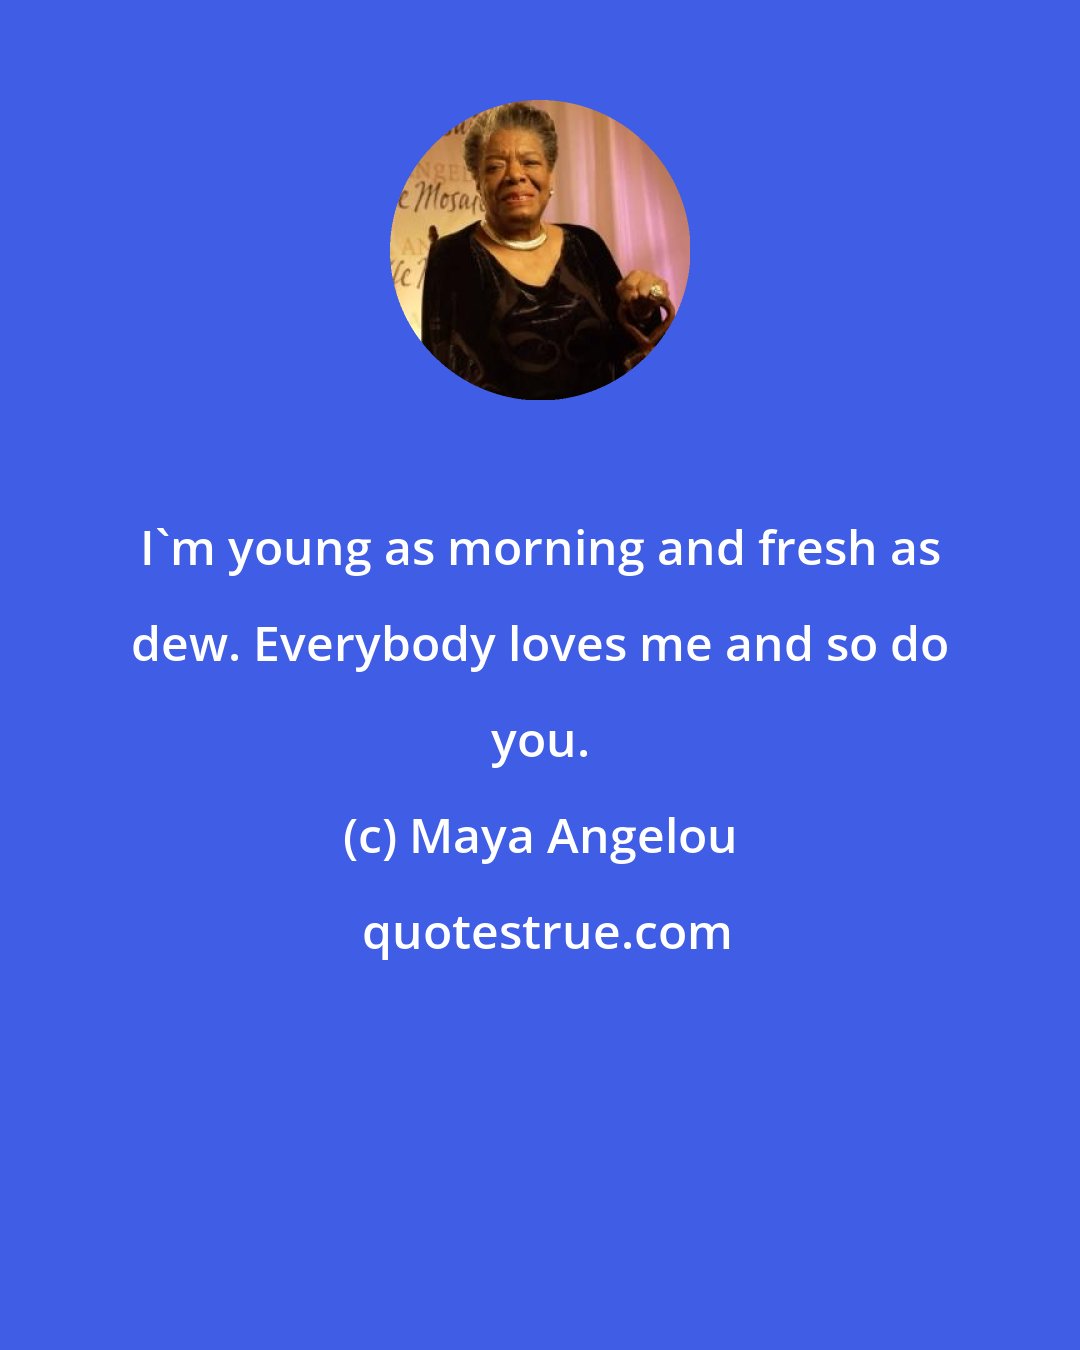 Maya Angelou: I'm young as morning and fresh as dew. Everybody loves me and so do you.